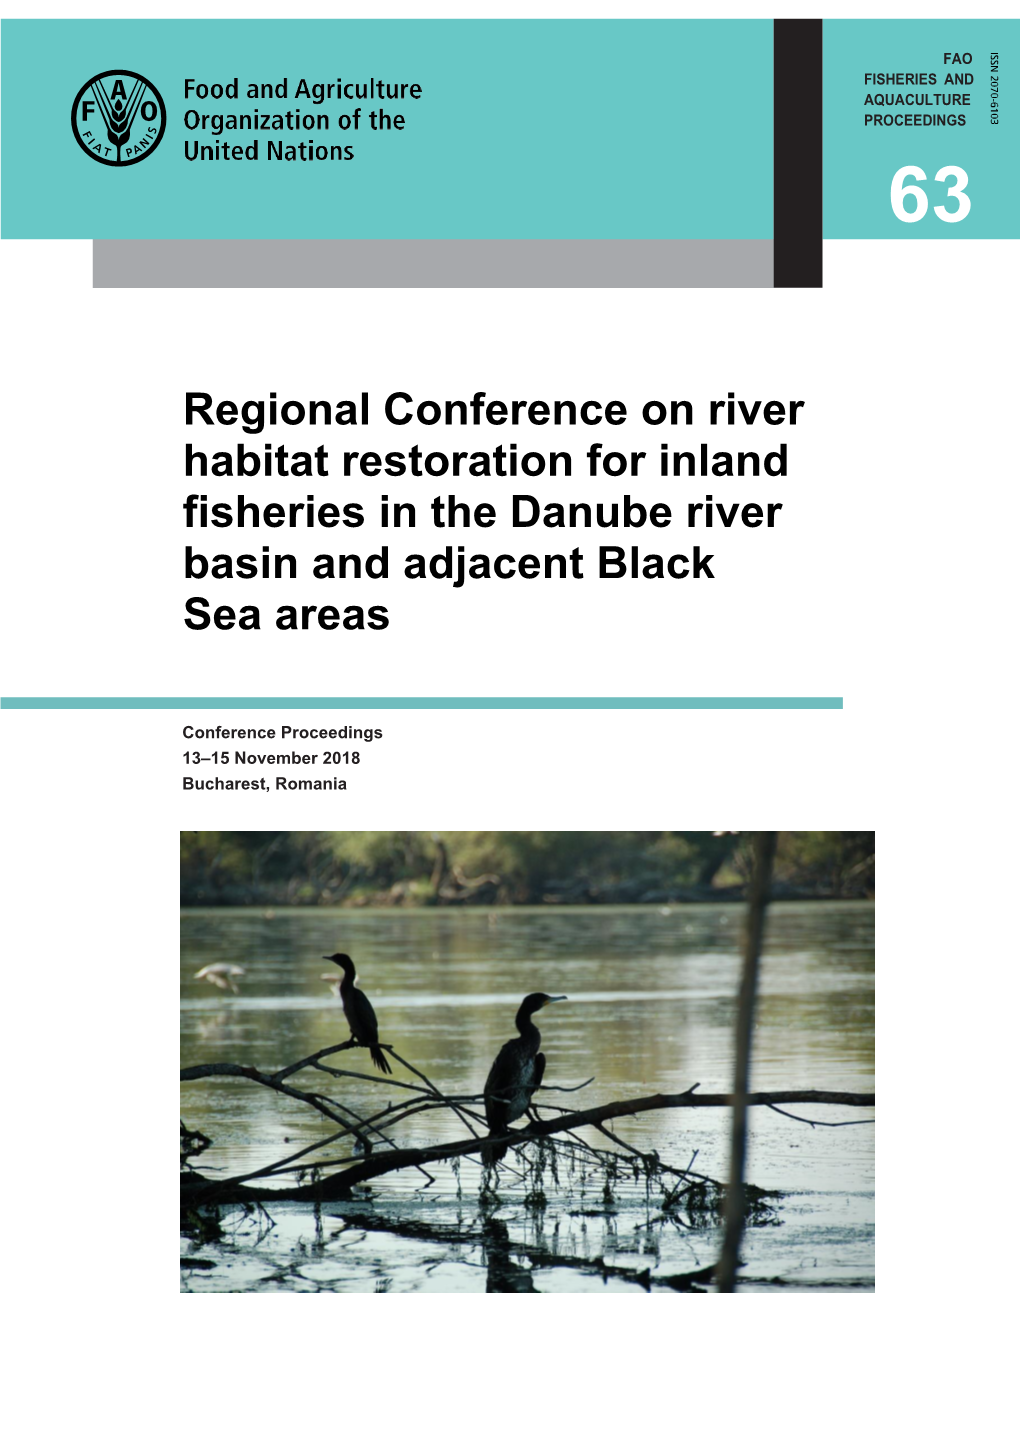 Regional Conference on River Habitat Restoration for Inland Fisheries in the Danube River Basin and Adjacent Black Sea Areas